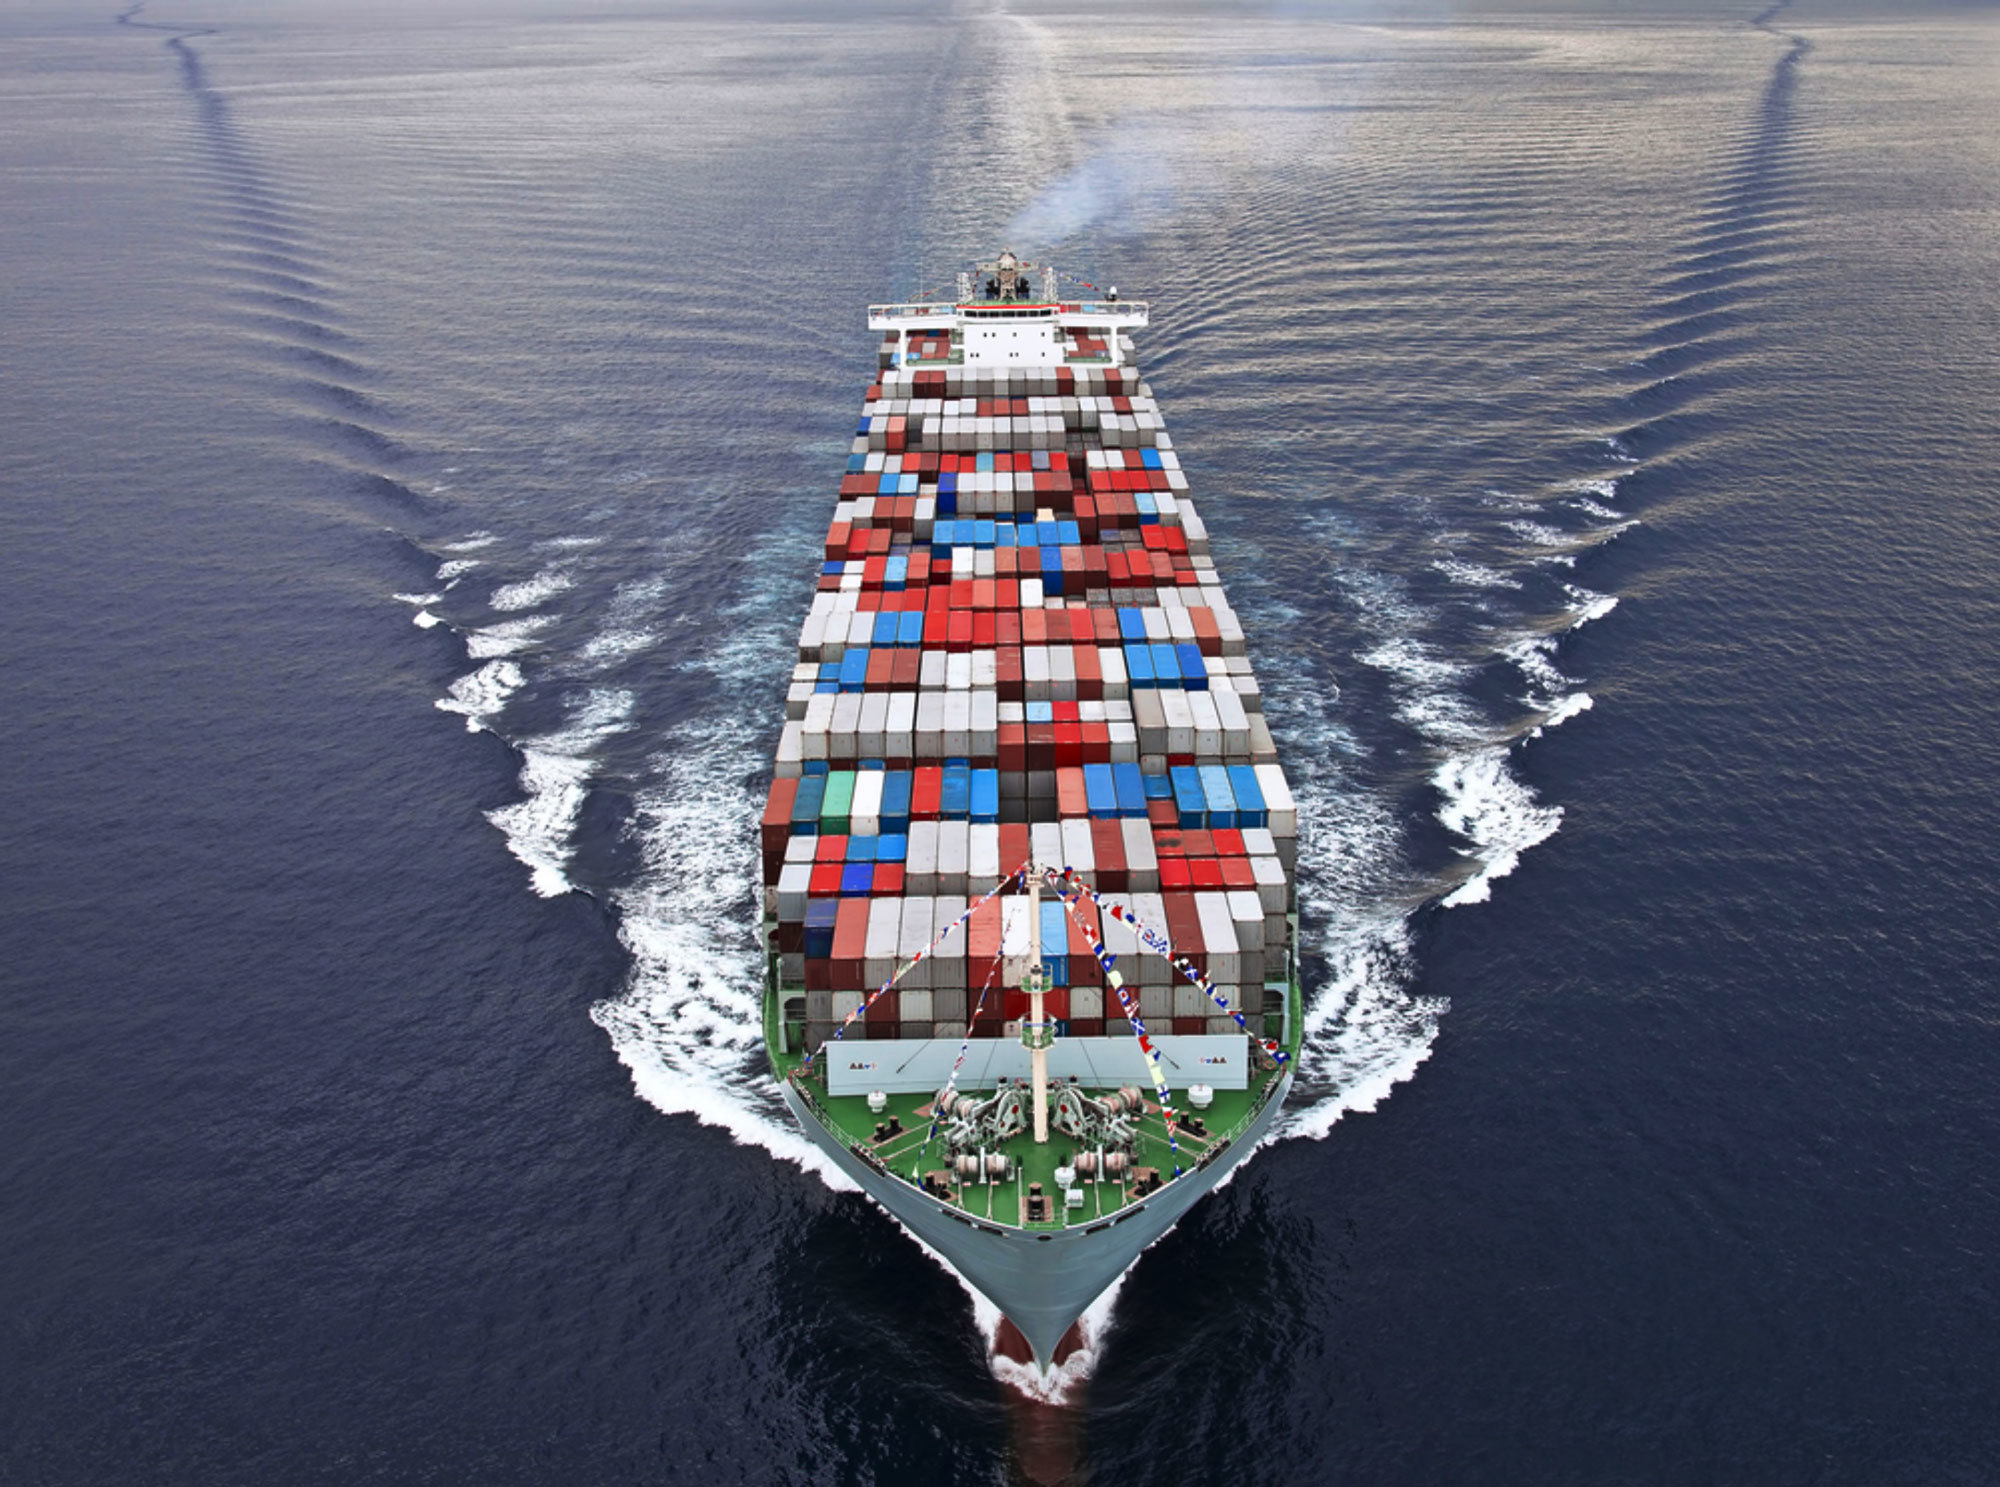 Cutting GHG emissions from shipping - 10 years of mandatory rules